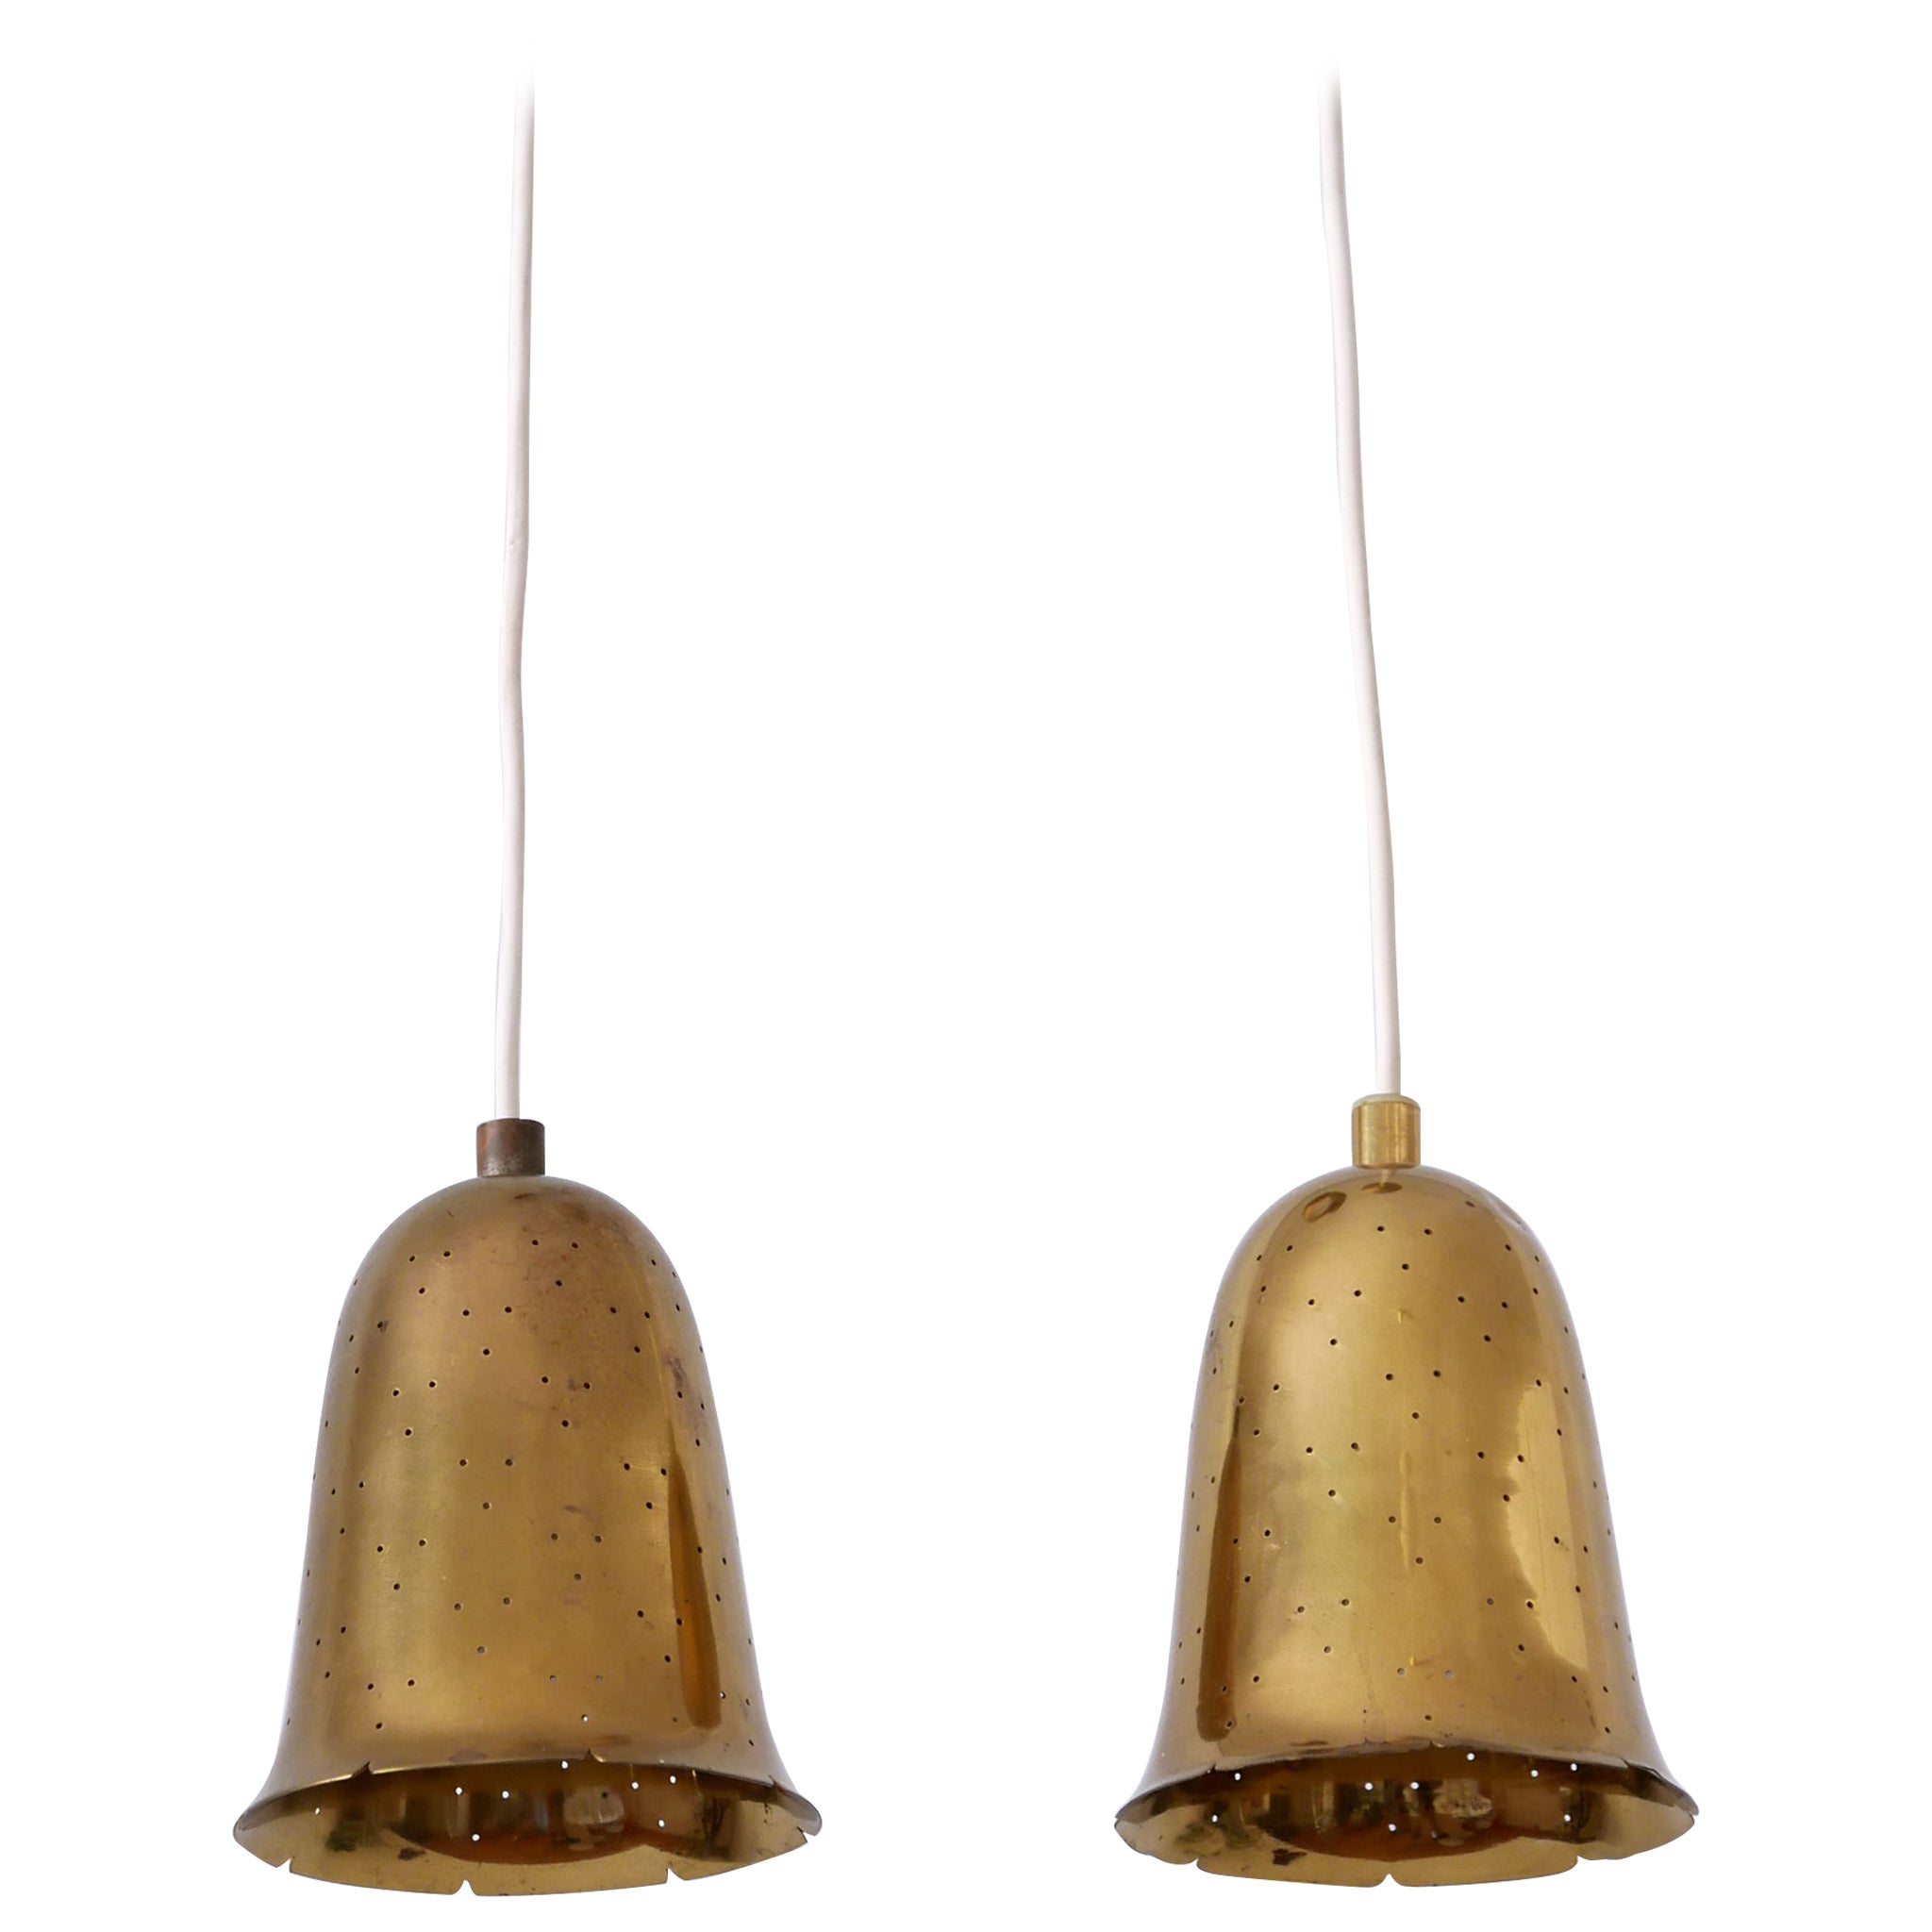 Set of Two Lovely Mid Century Modern Pendant Lamps by Boréns Borås Sweden 1950s